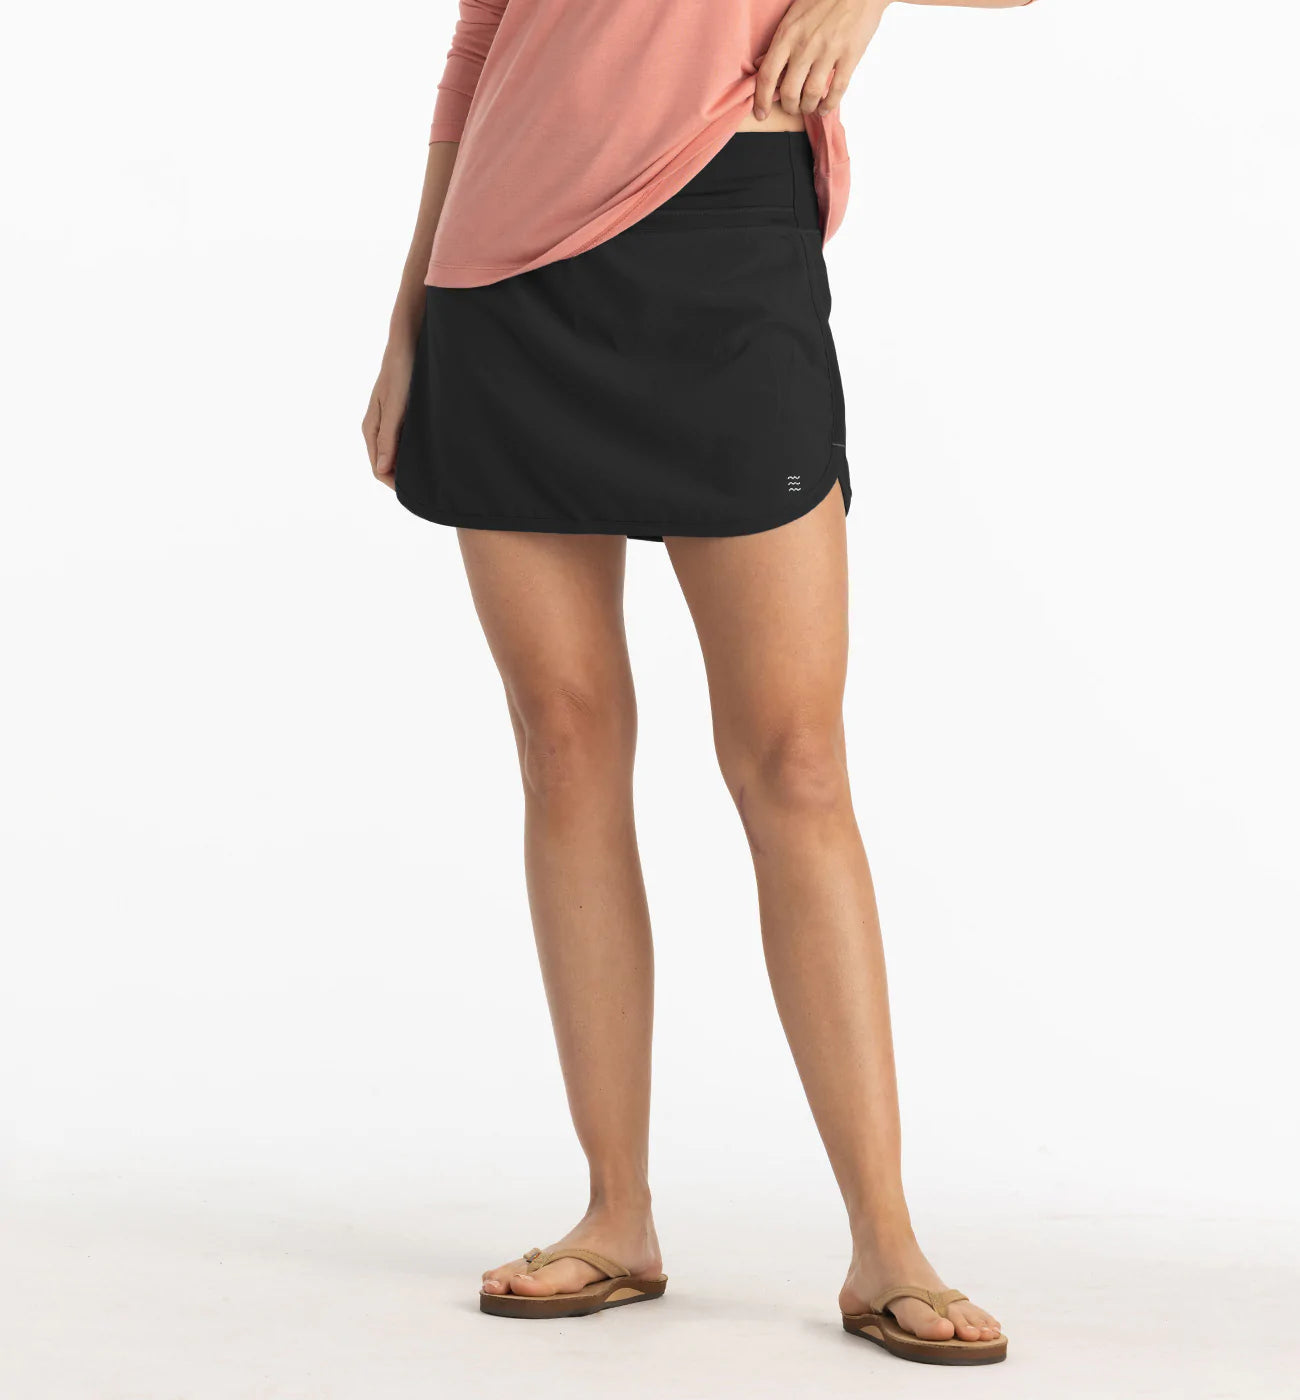 Shorts with a skirt (skort) are a fashion hit this summer!